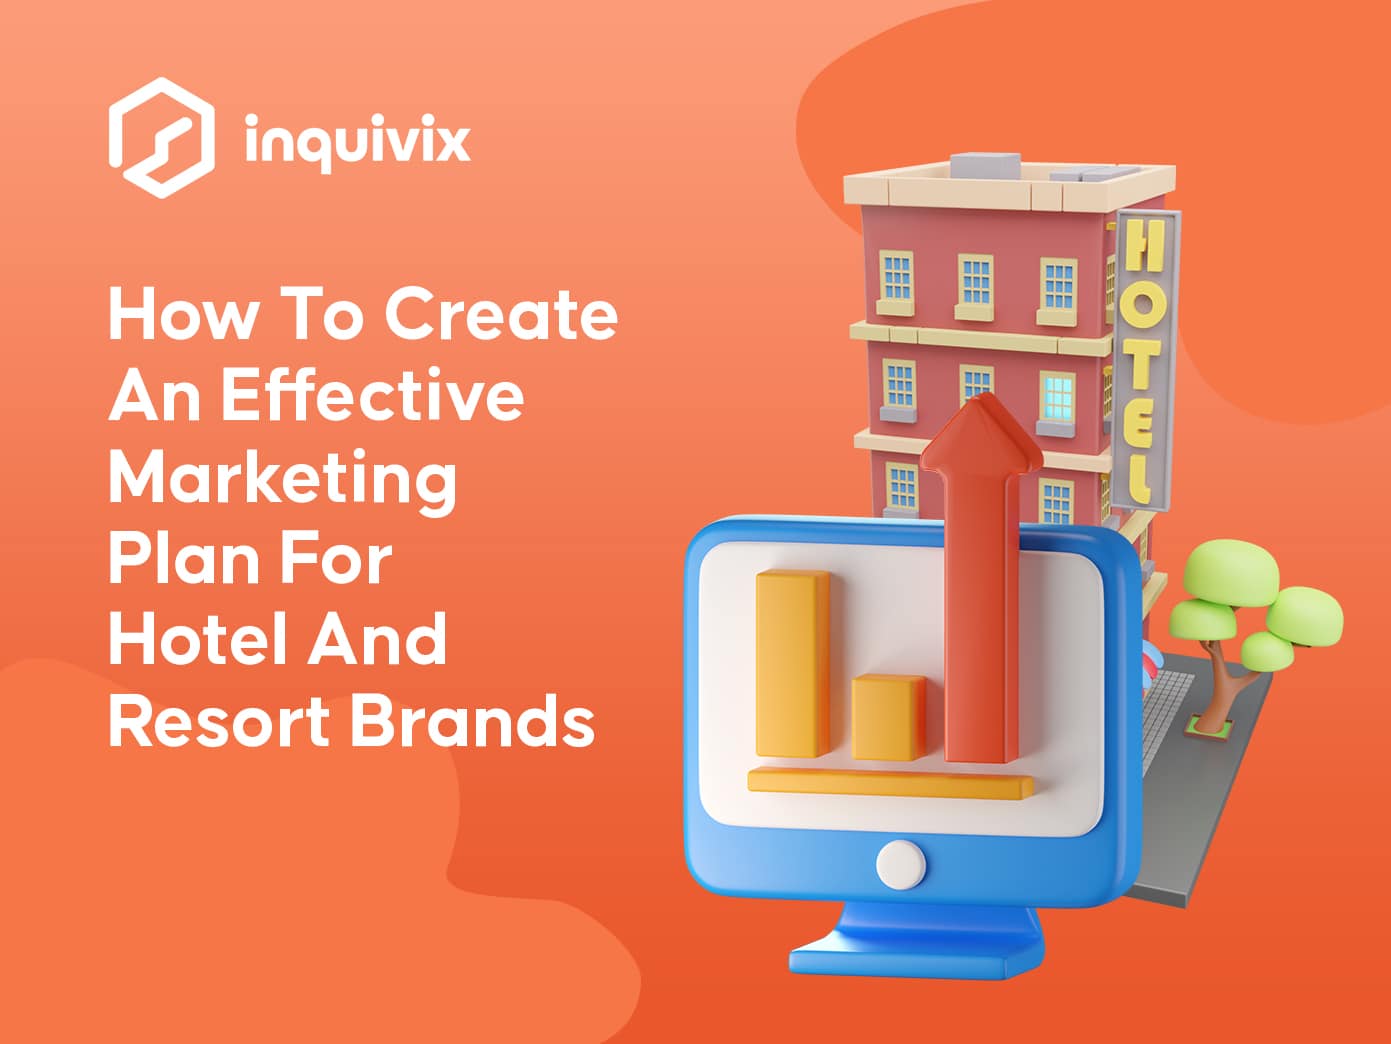 How To Create An Effective Marketing Plan For Hotel And Resort Brands | INQUIVIX